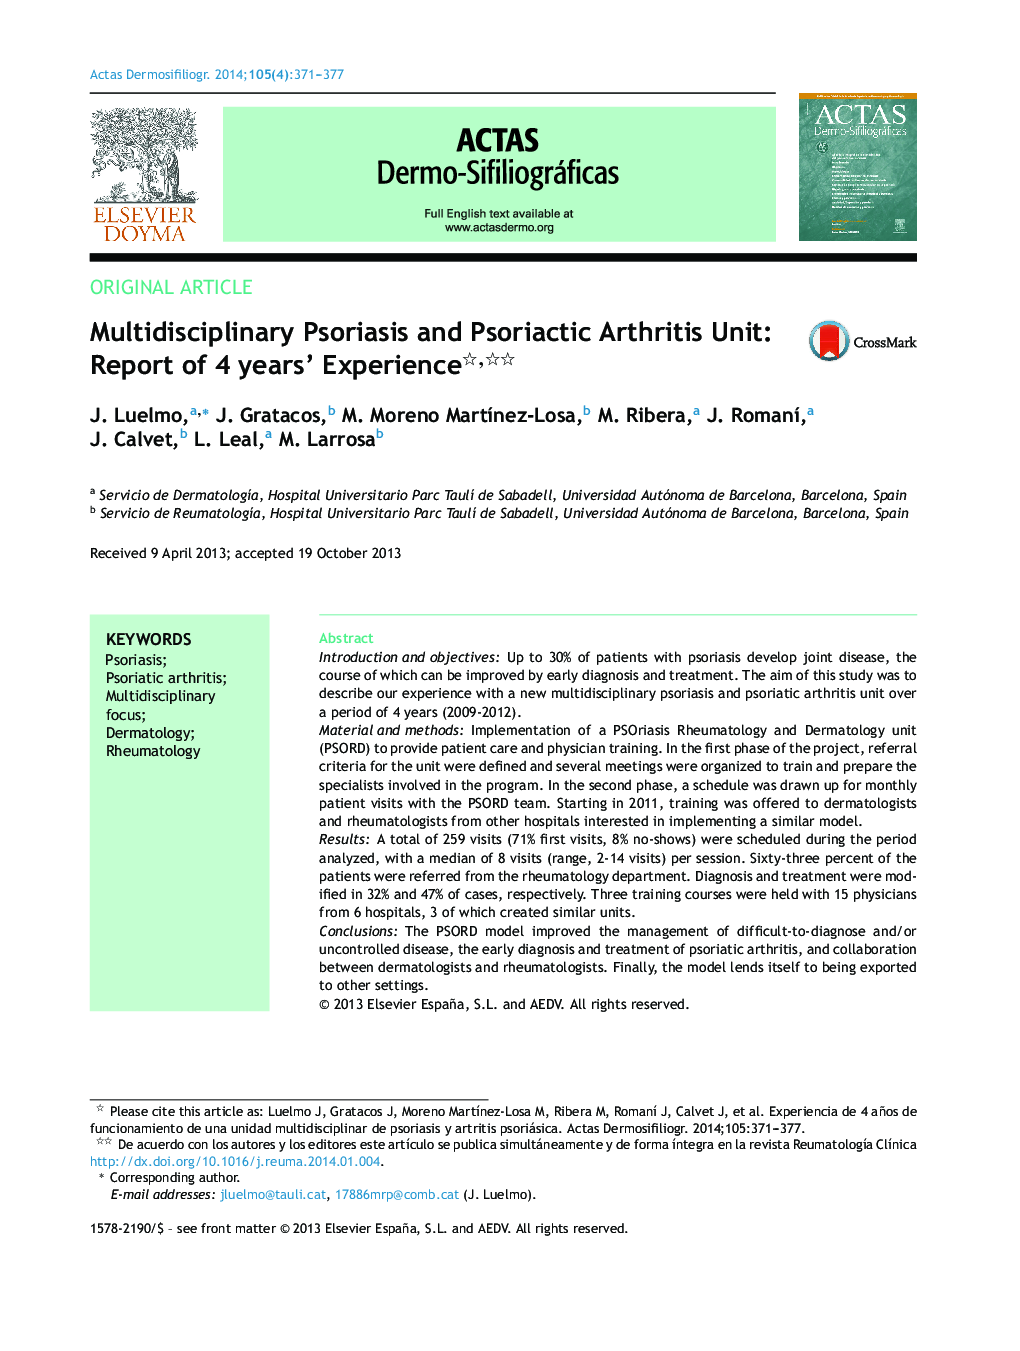 Multidisciplinary Psoriasis and Psoriactic Arthritis Unit: Report of 4 years’ Experience 